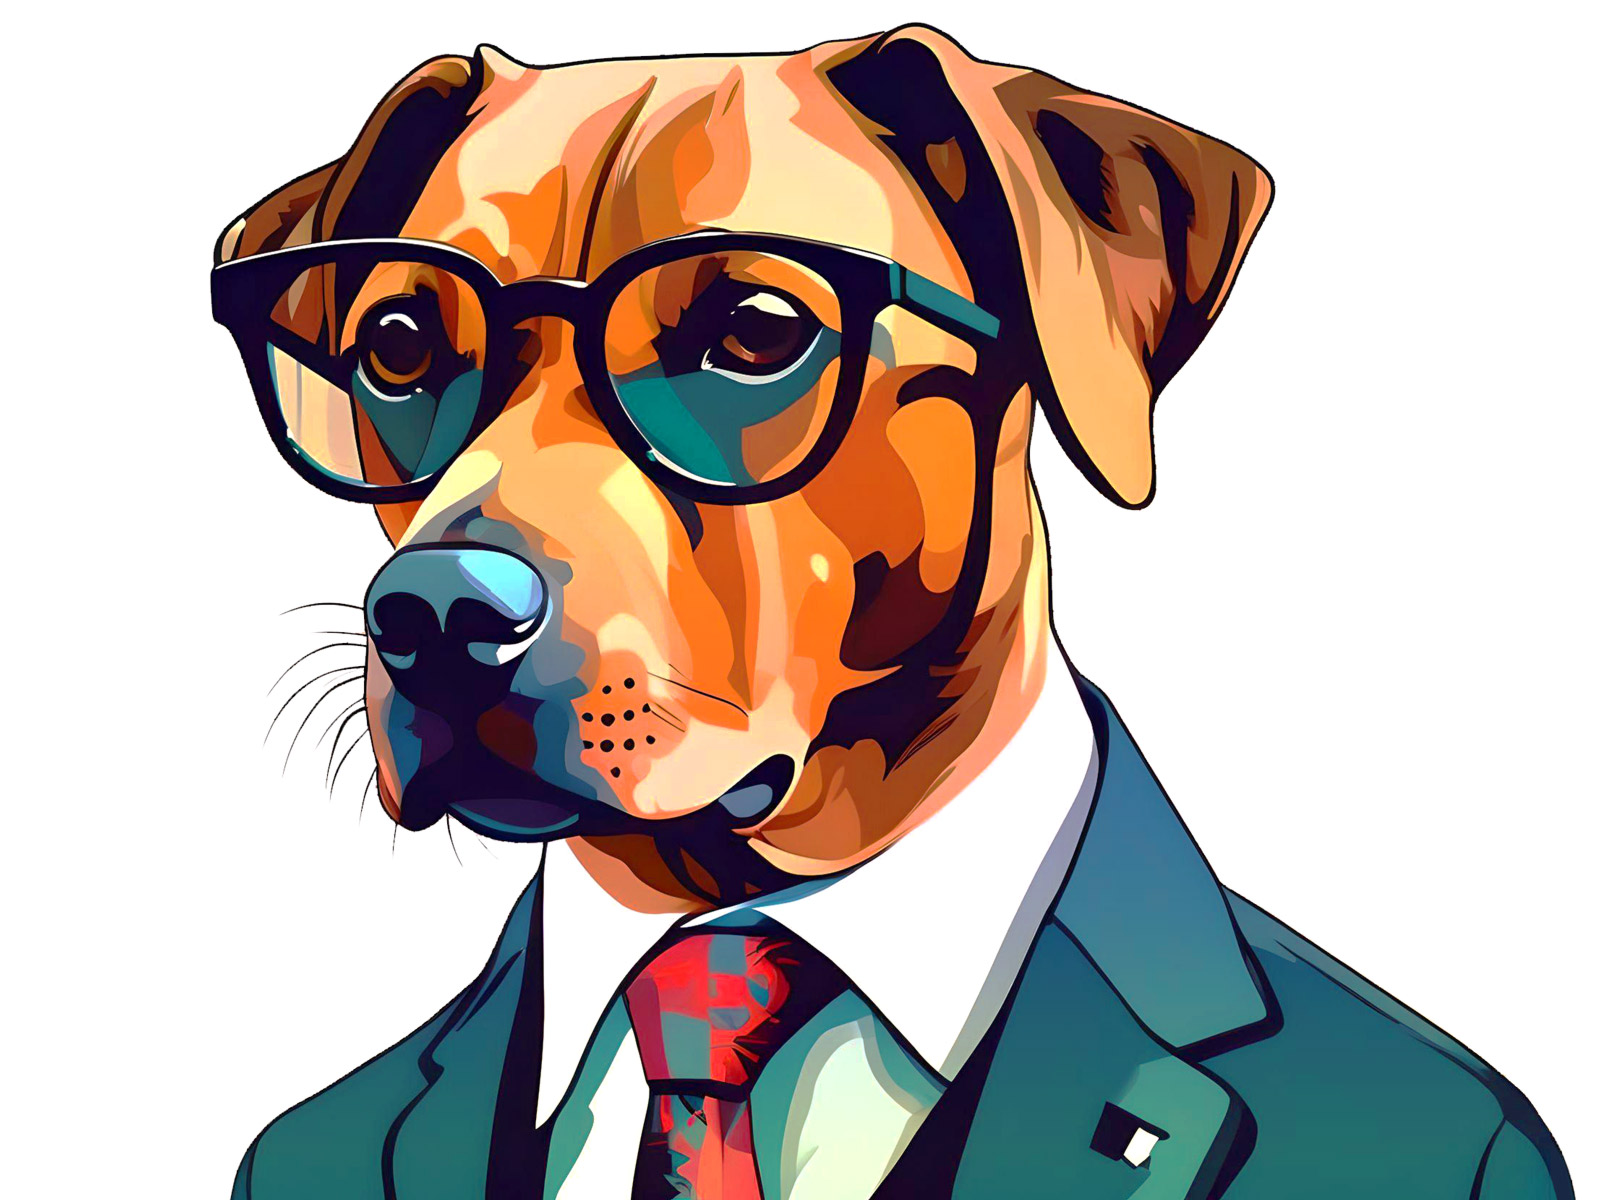 Business dog is serious about getting client testimonials